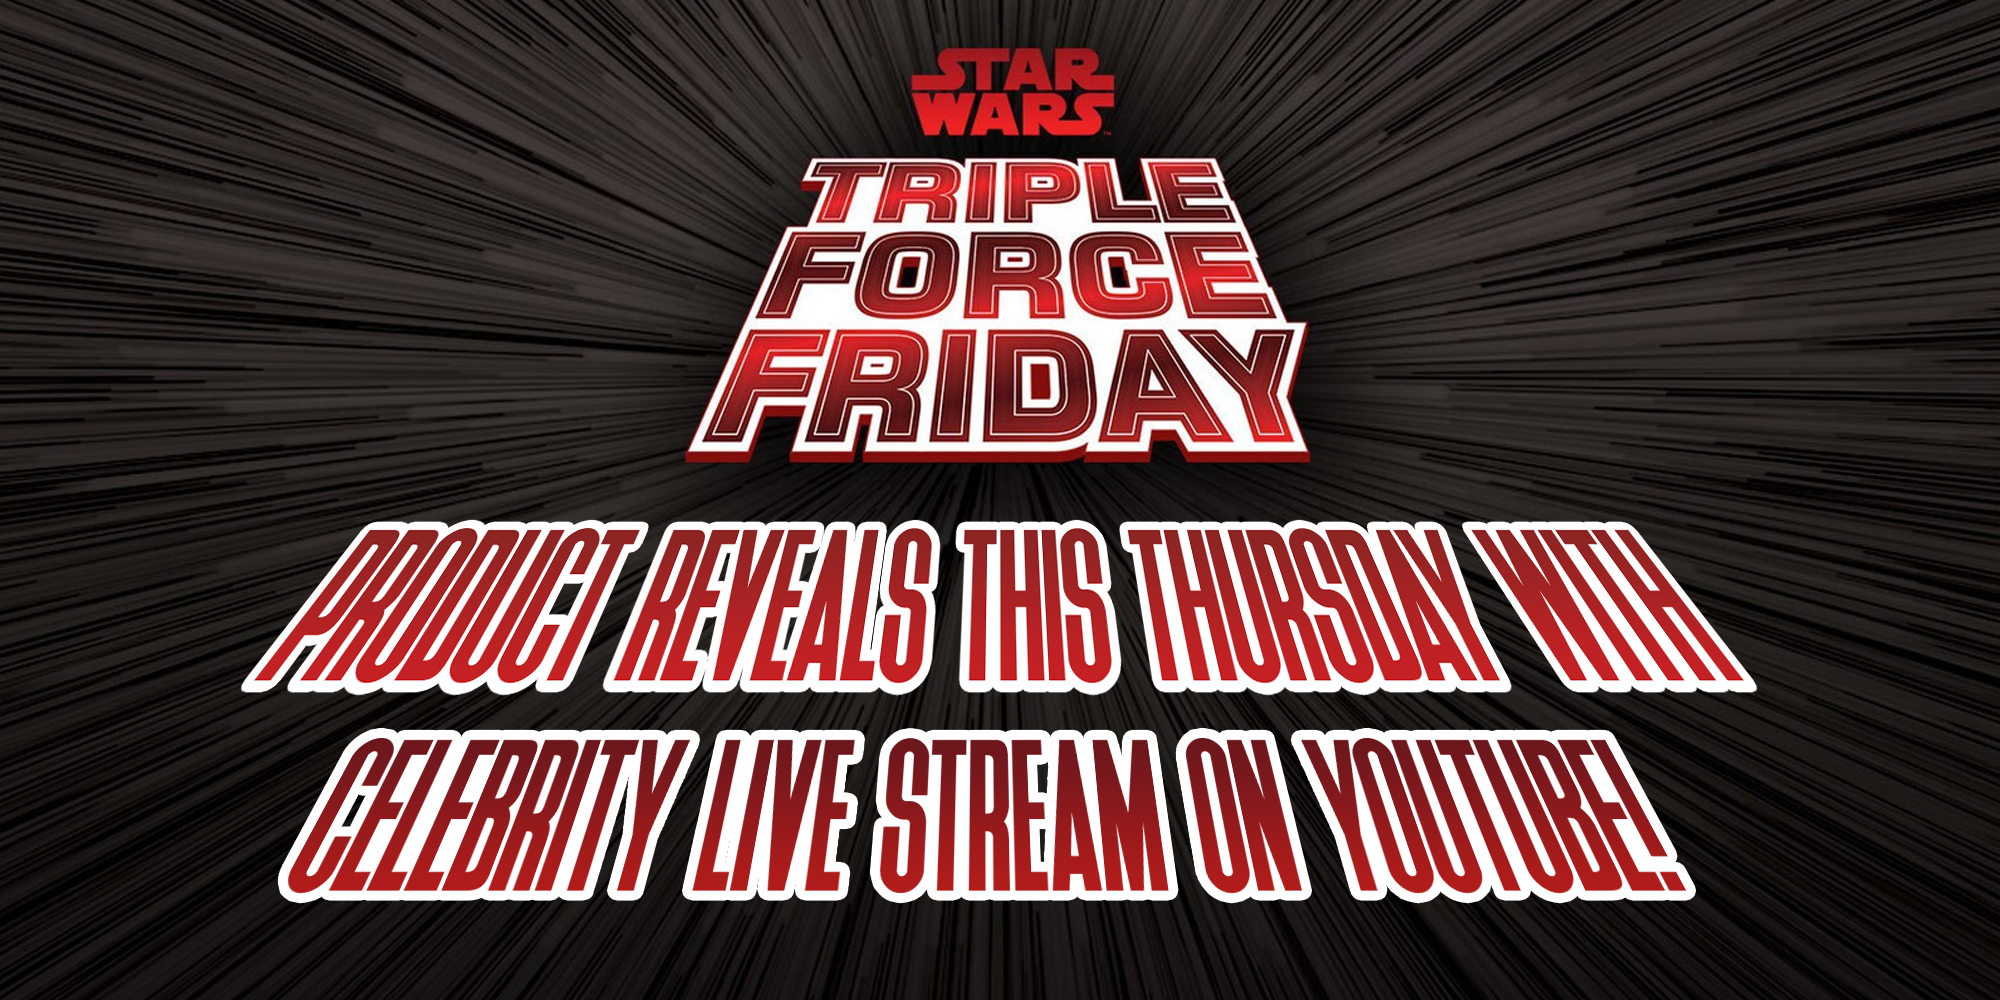 Triple Force Friday Preview This Thursday!